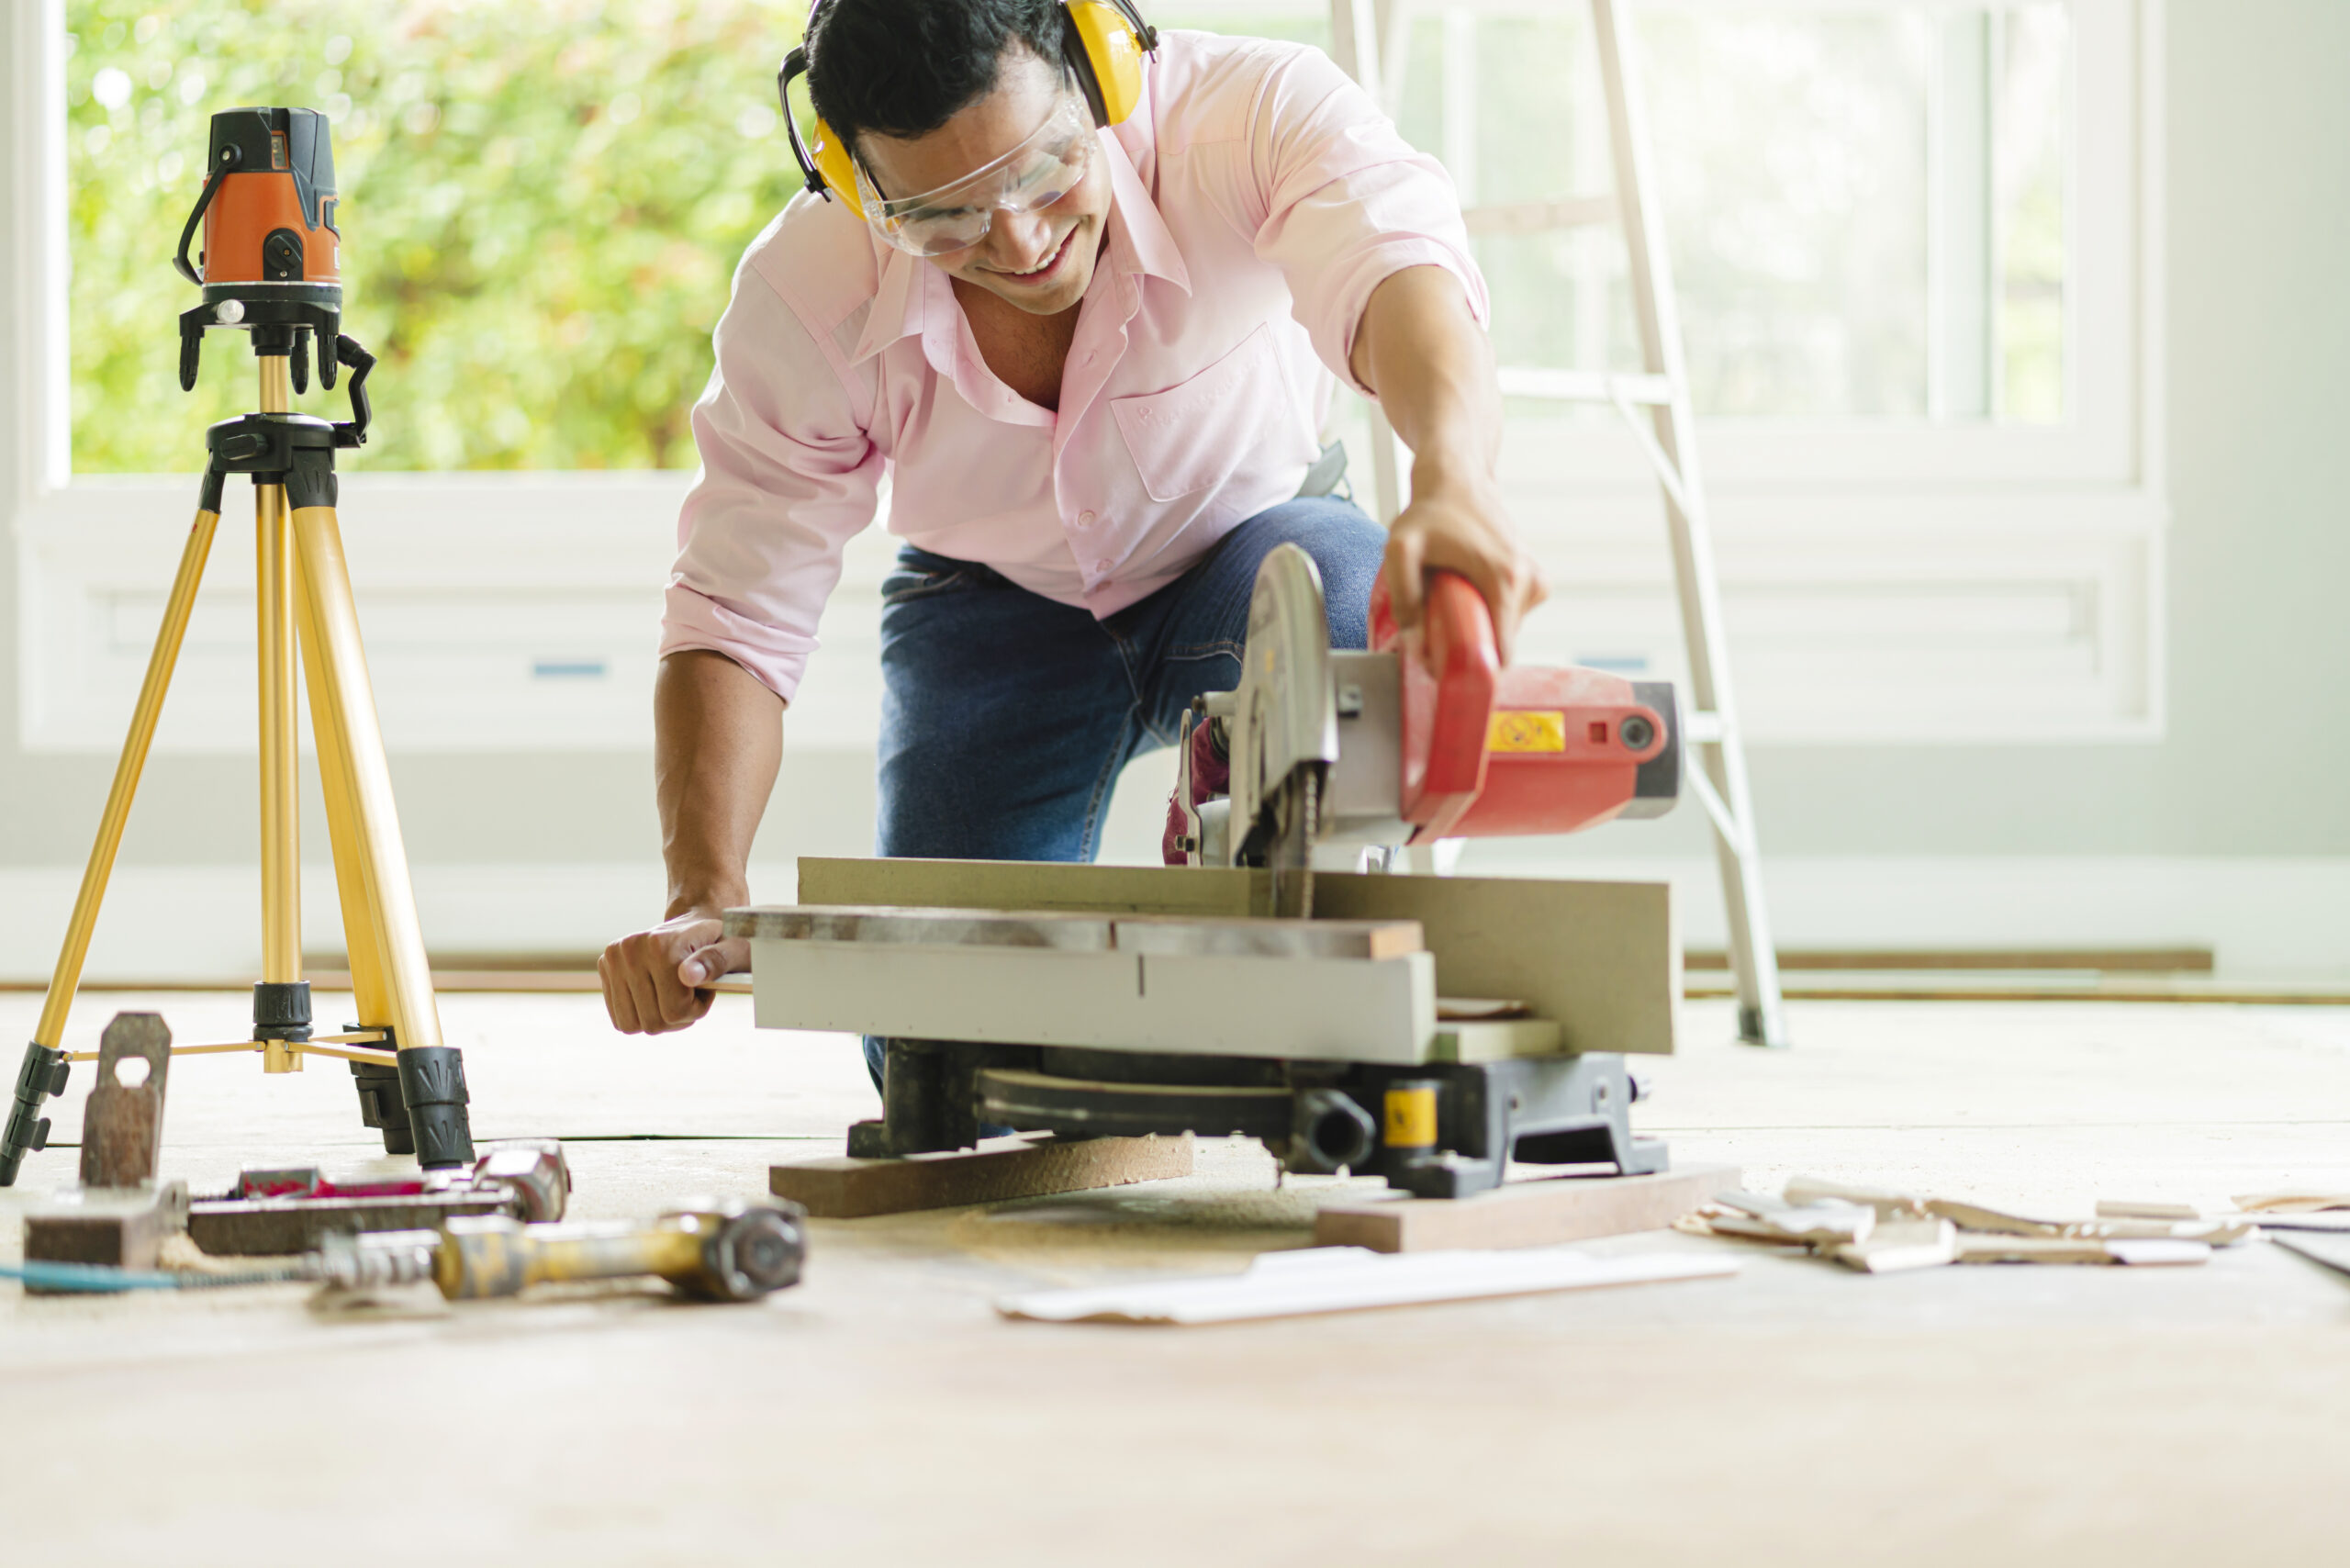 home improvement projects that could actually hurt your home's value